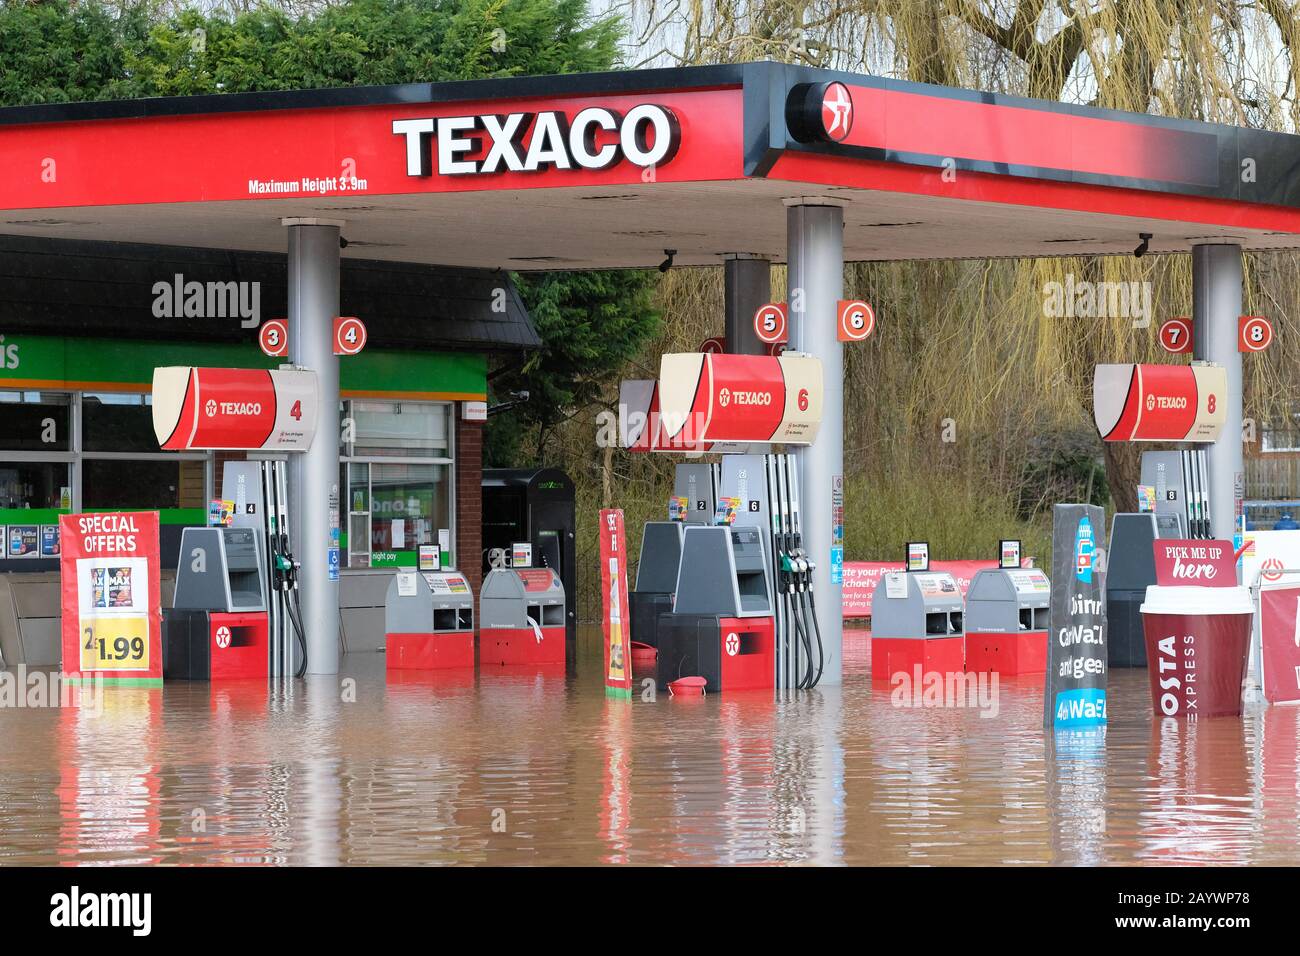 Hereford, Herefordshire, UK - Monday 17th February 2020 - Flooding along the Ledbury Road area of the city  includes a flooded Texaco fuel station.  Photo Steven May / Alamy Live News Stock Photo